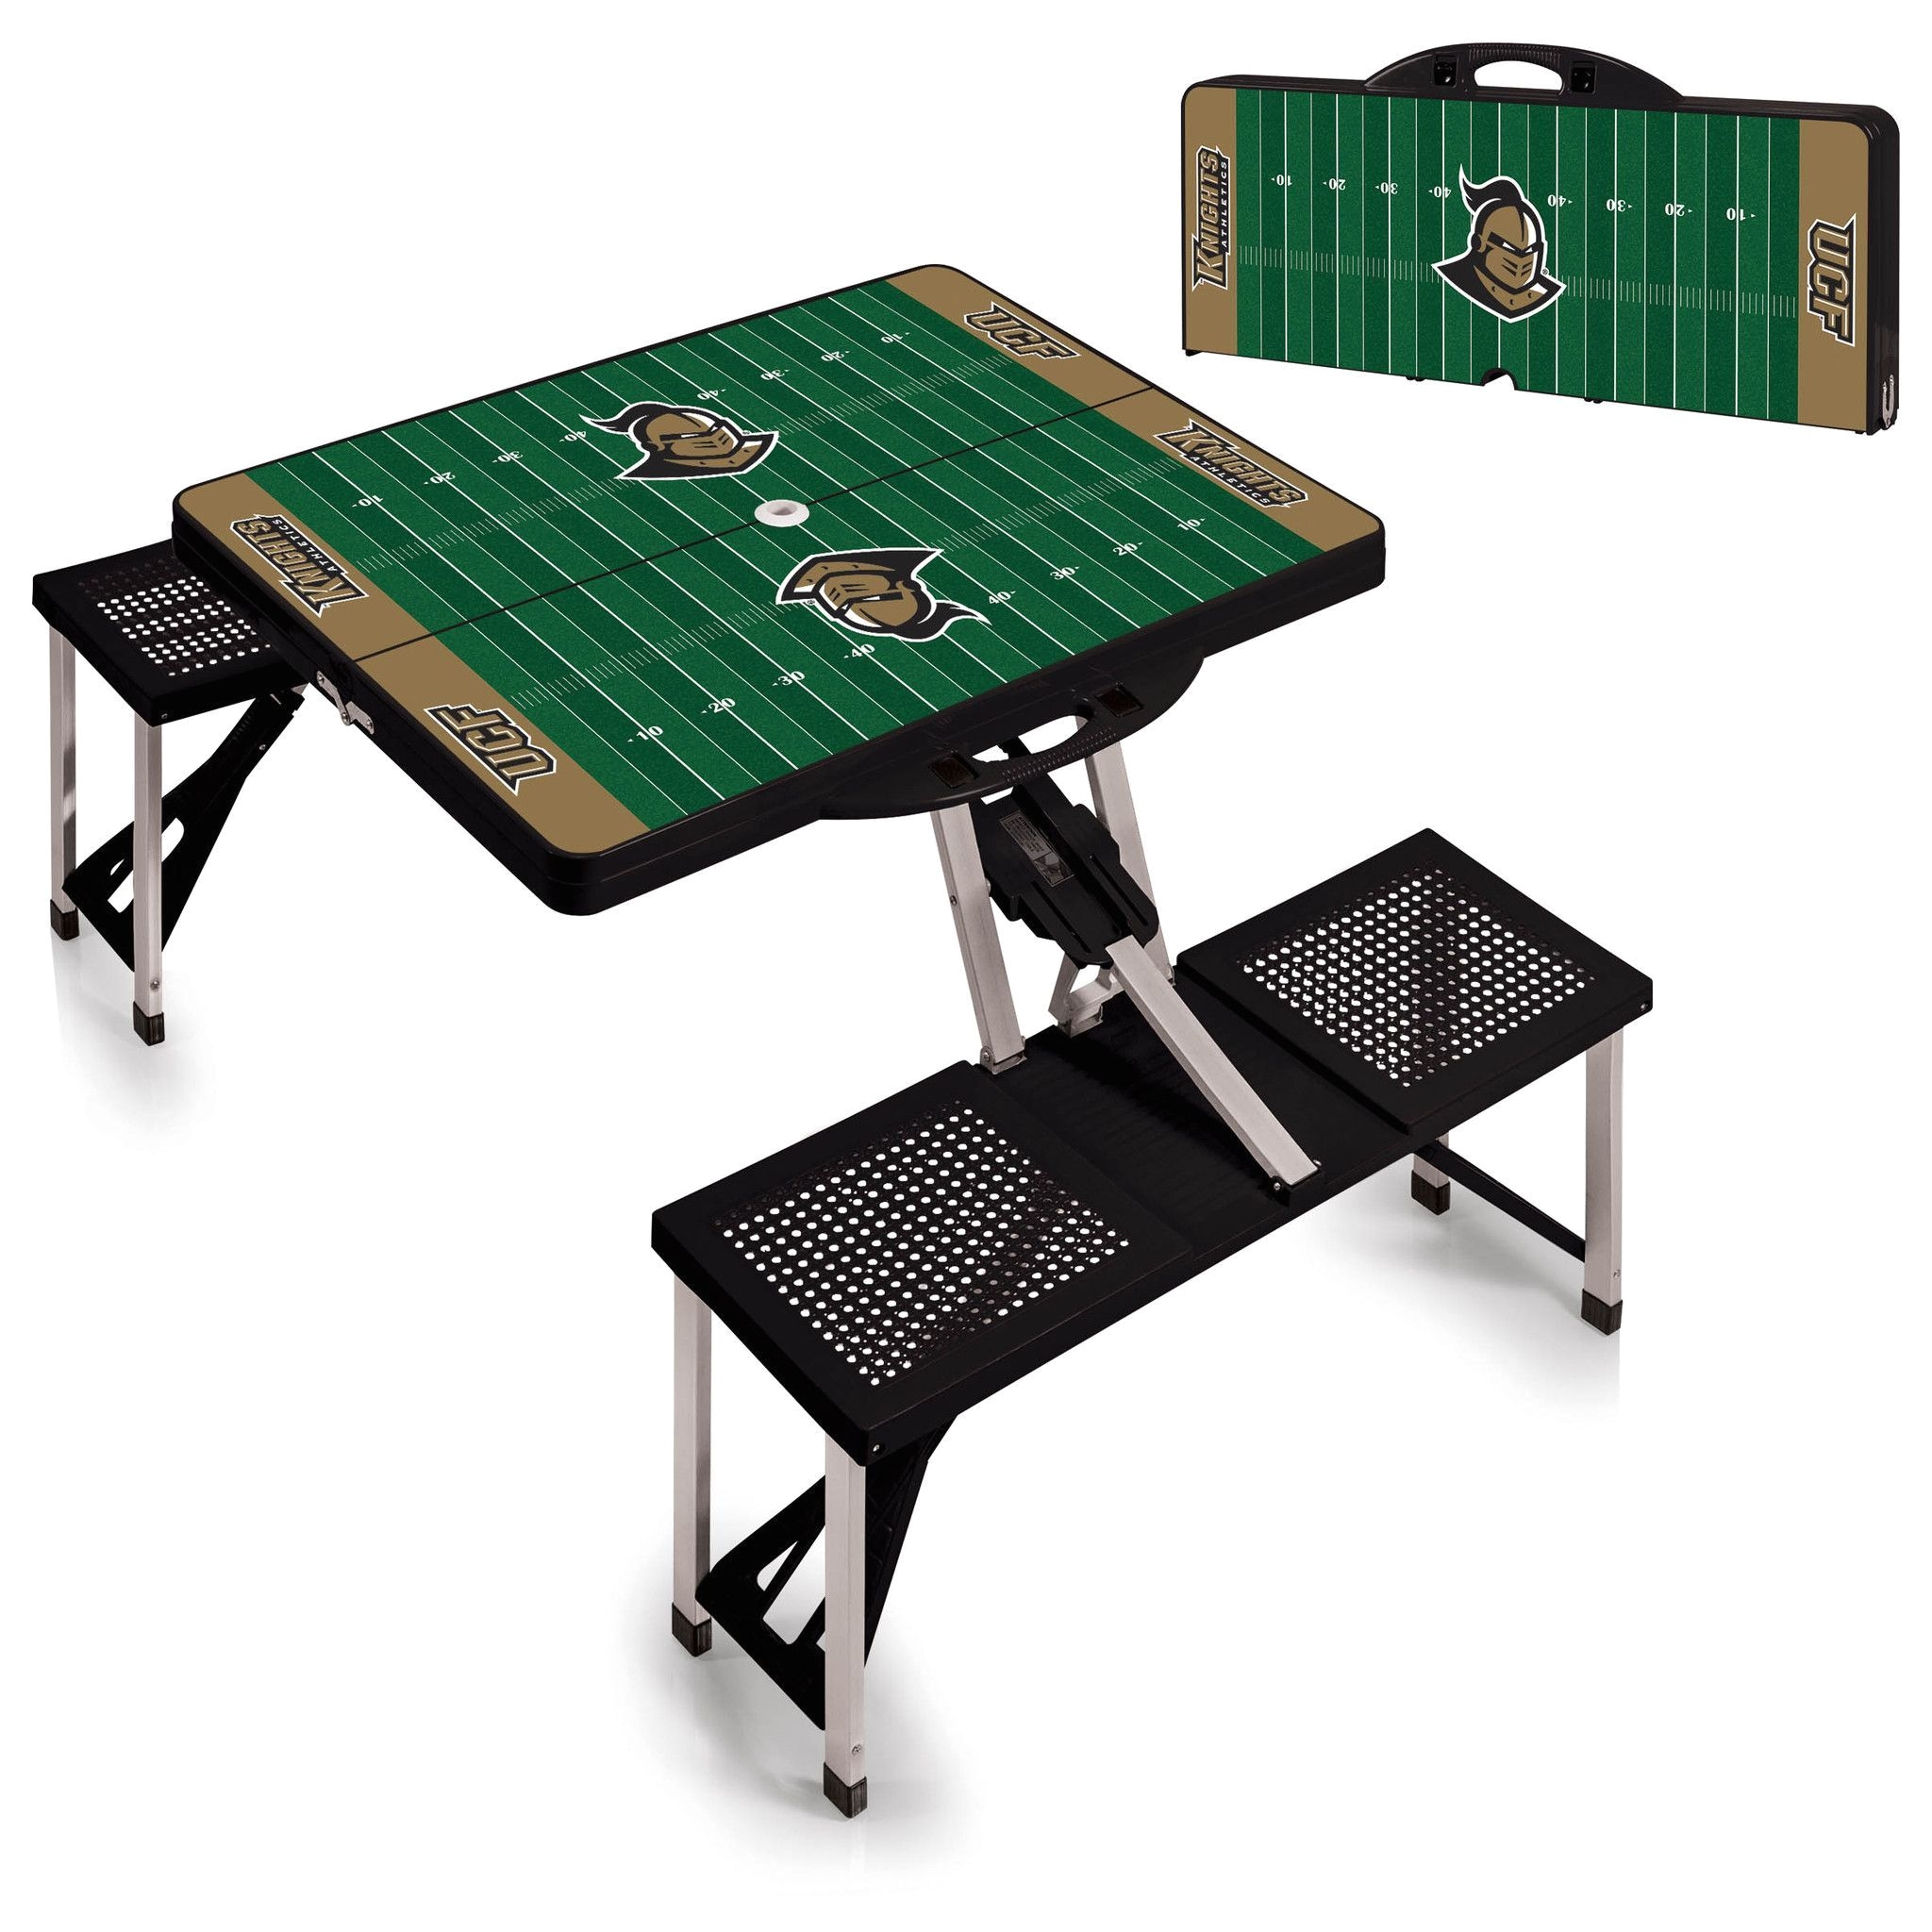 the ucf knights portable picnic table sport with football graphics university of central florida tables